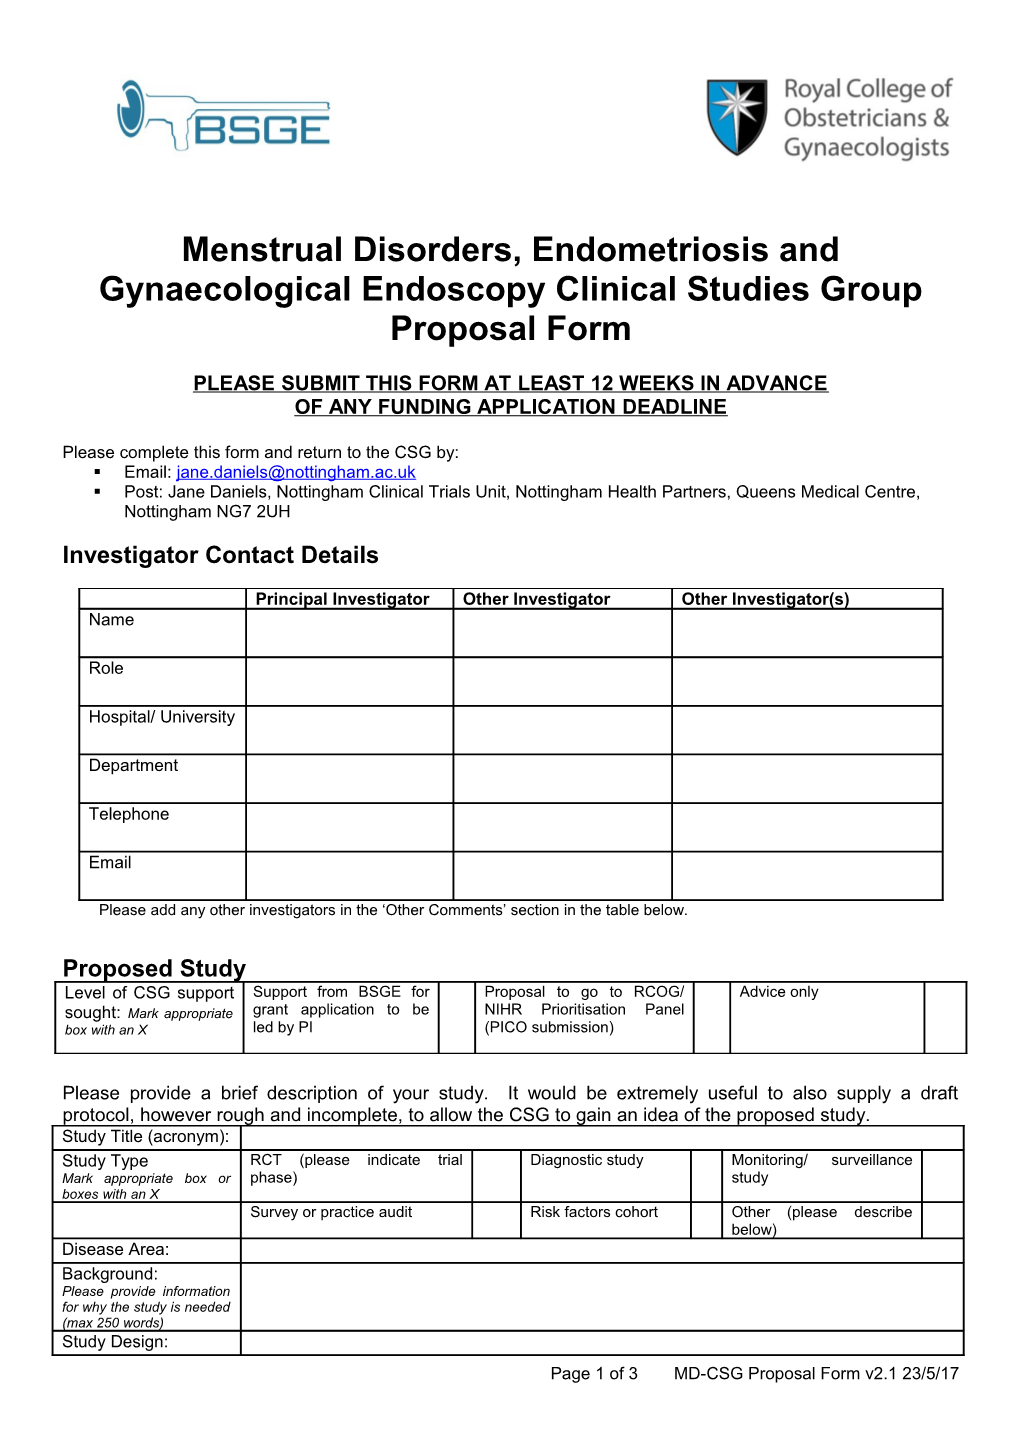 Menstrual Disorders, Endometriosis and Gynaecological Endoscopy Clinical Studies Group